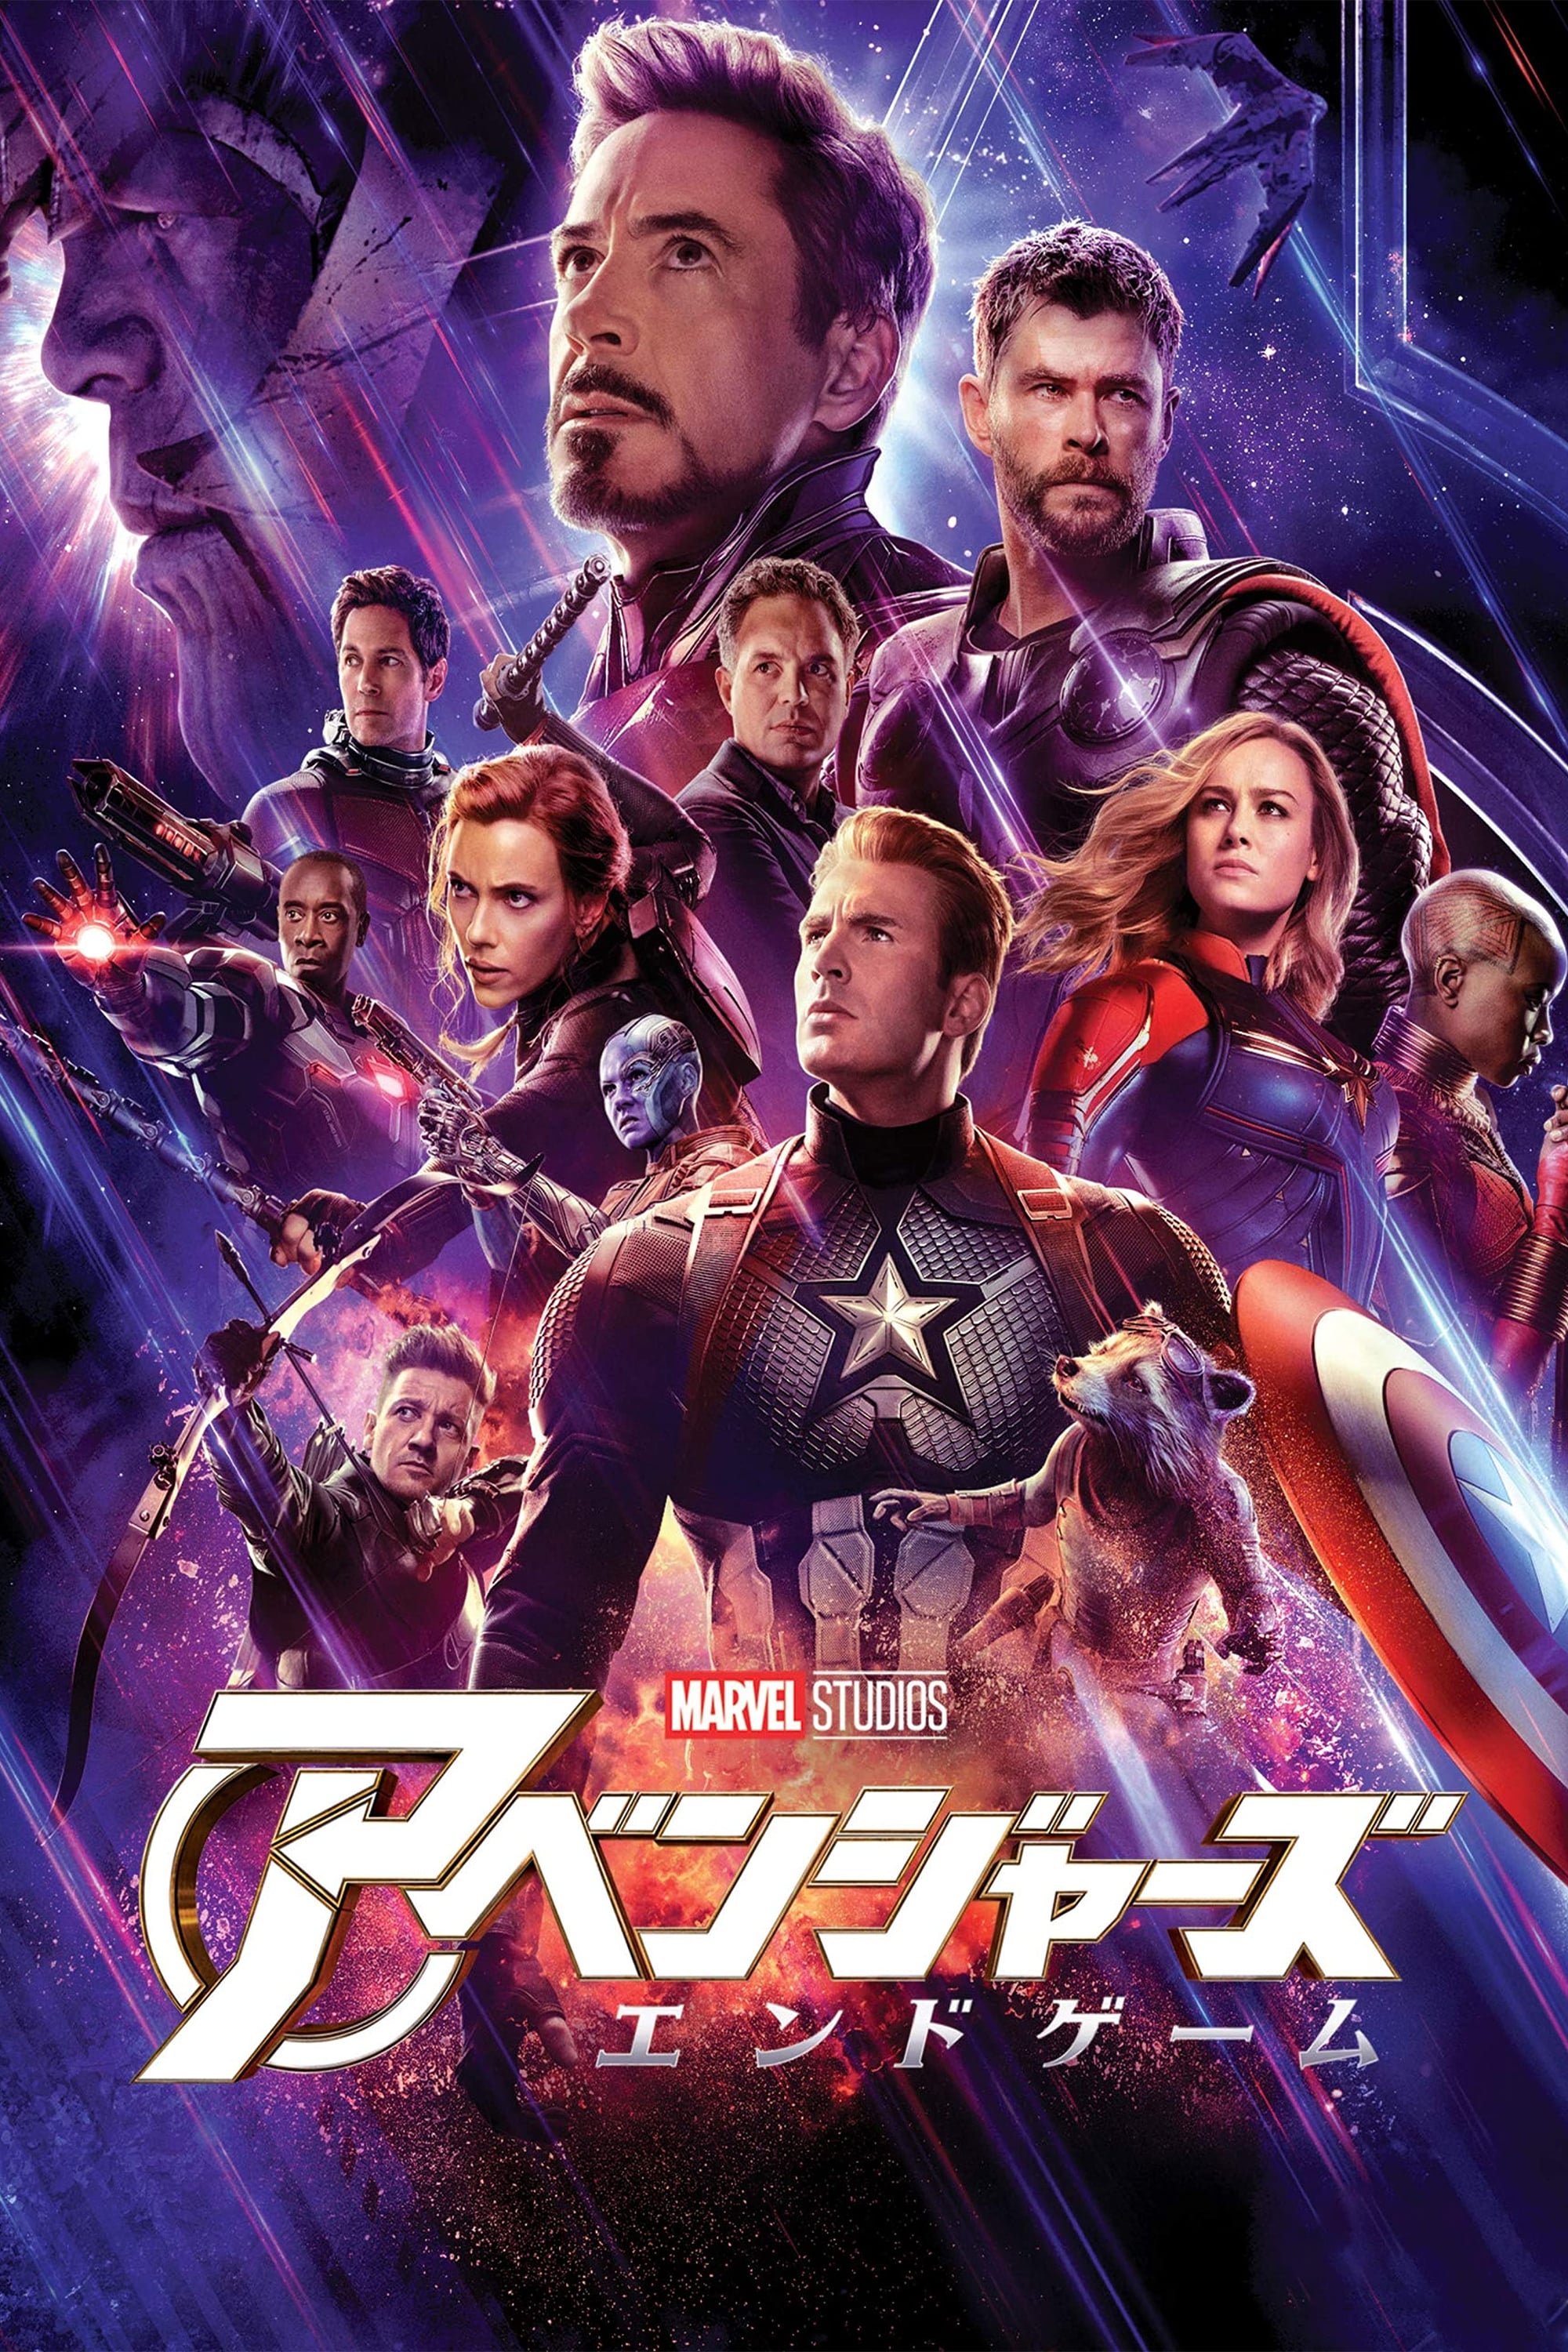 movie review about avengers